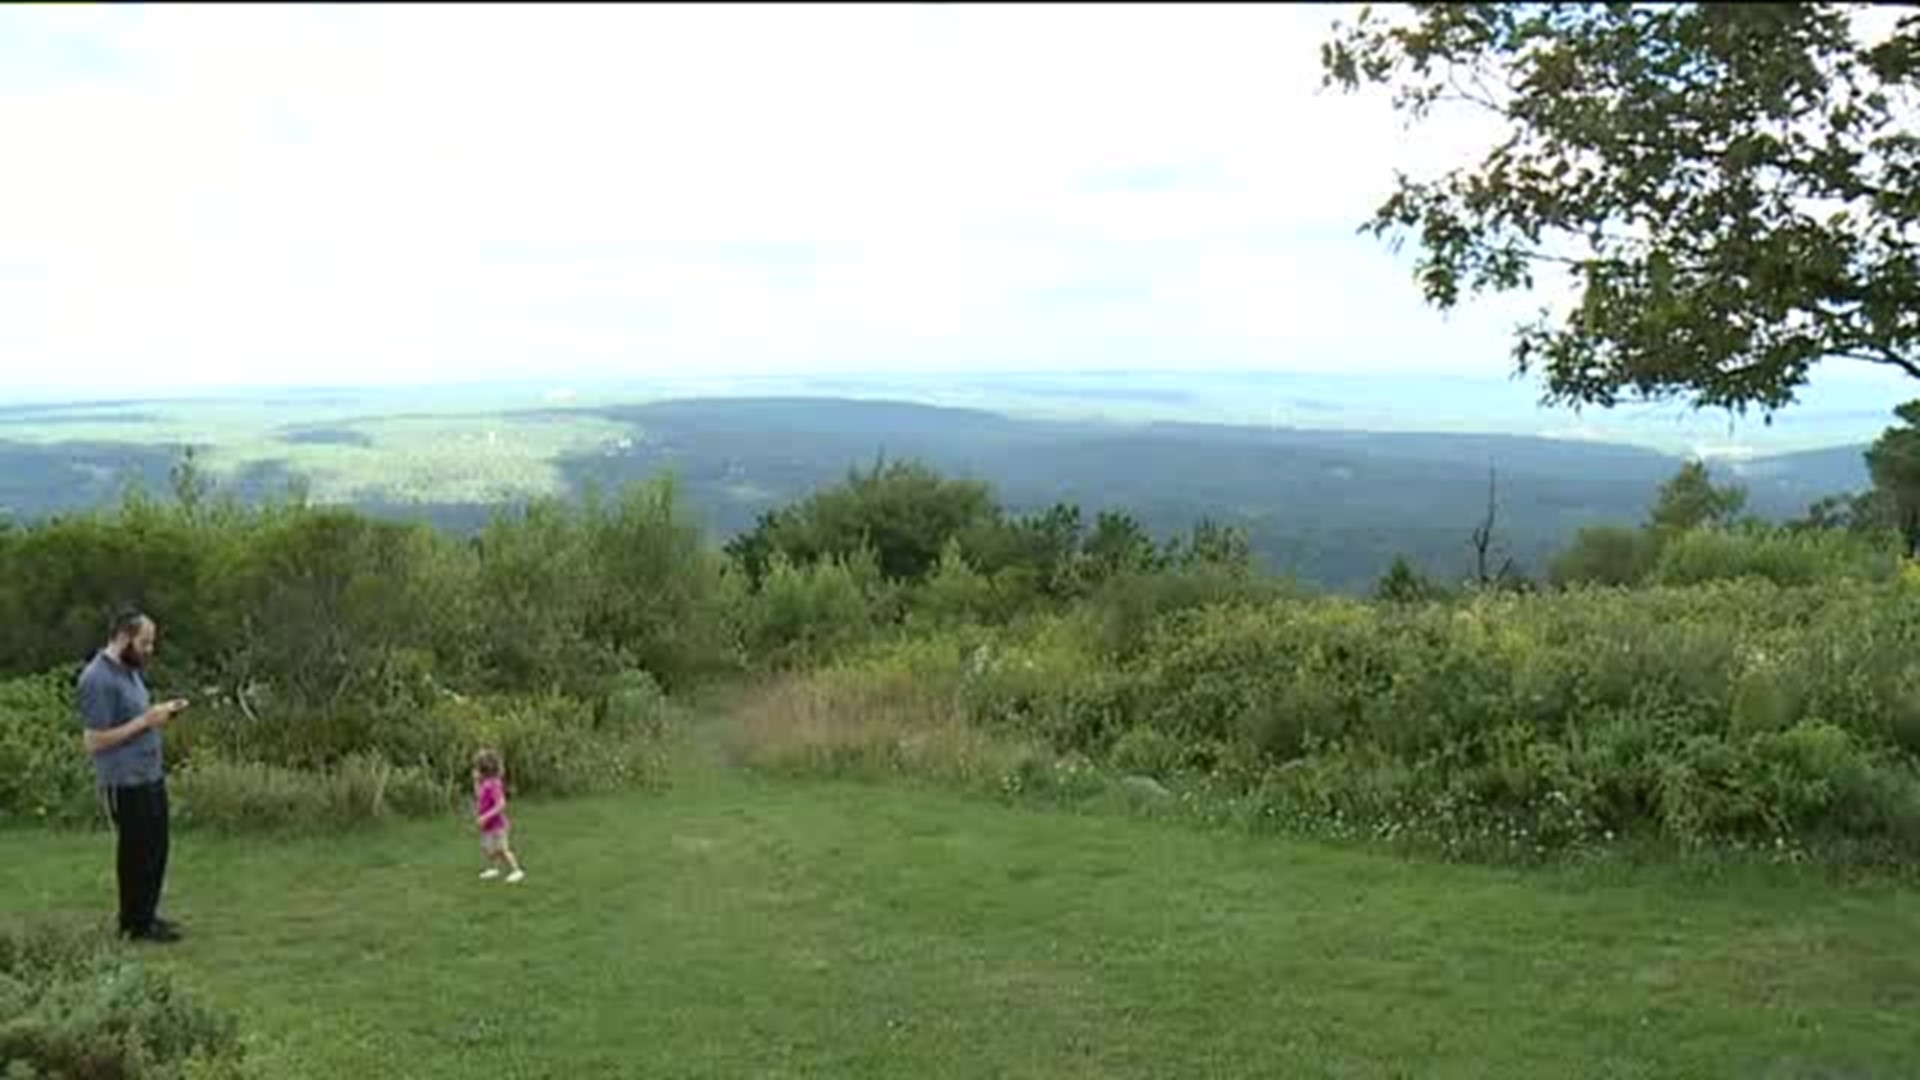 Locals Stay Local for Labor Day in the Poconos